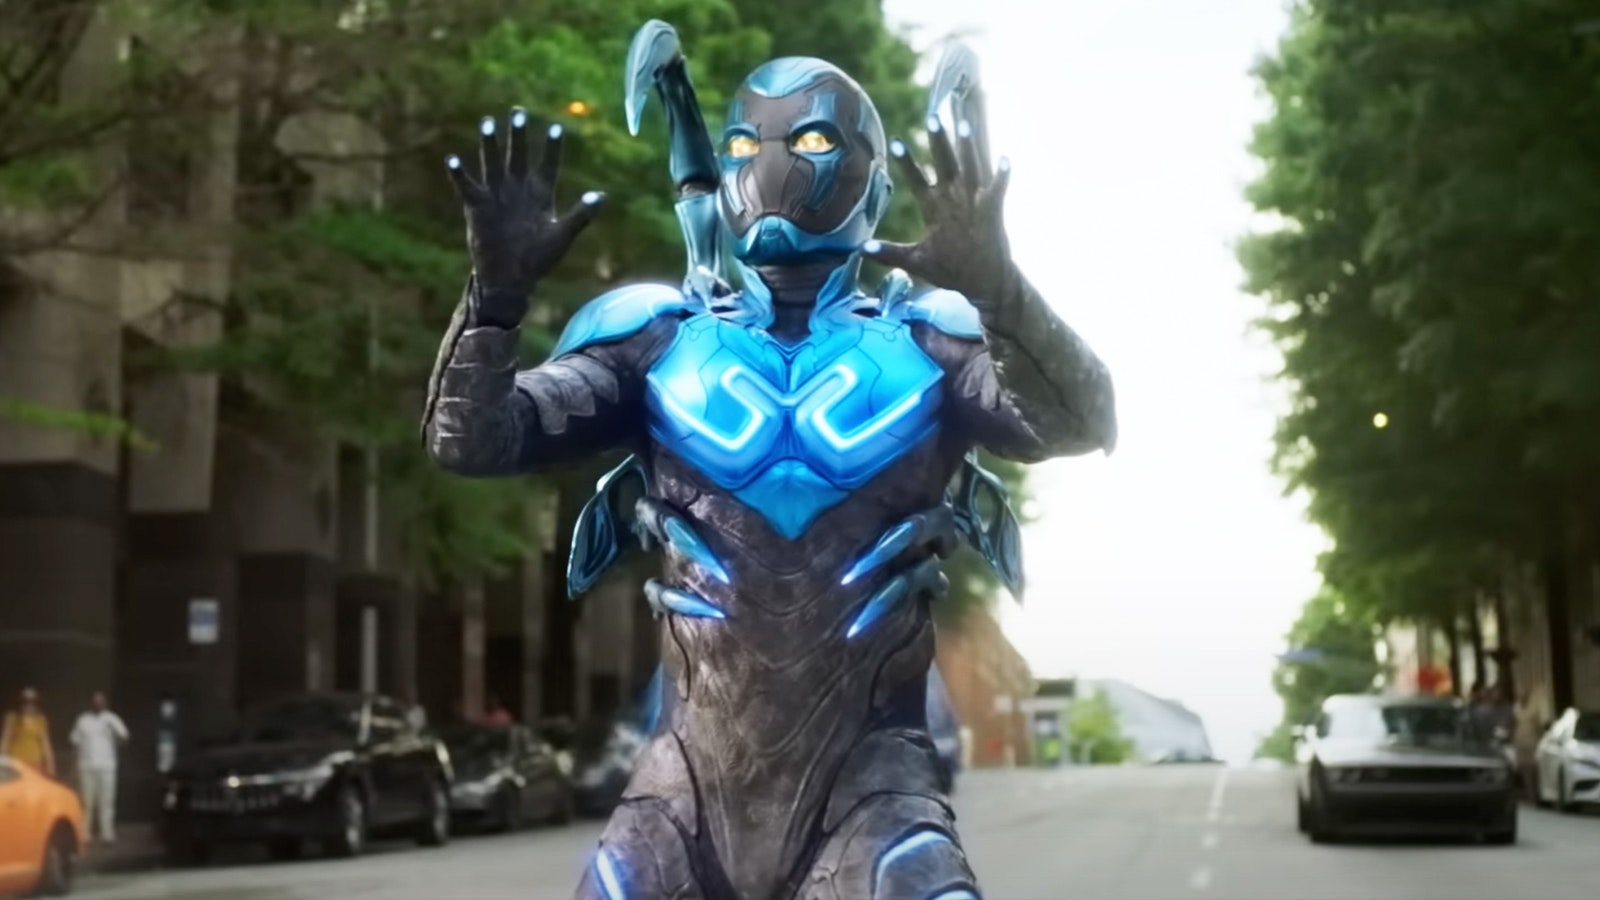 Blue Beetle' Cast & Character Guide: Meet the Stars of the Latest